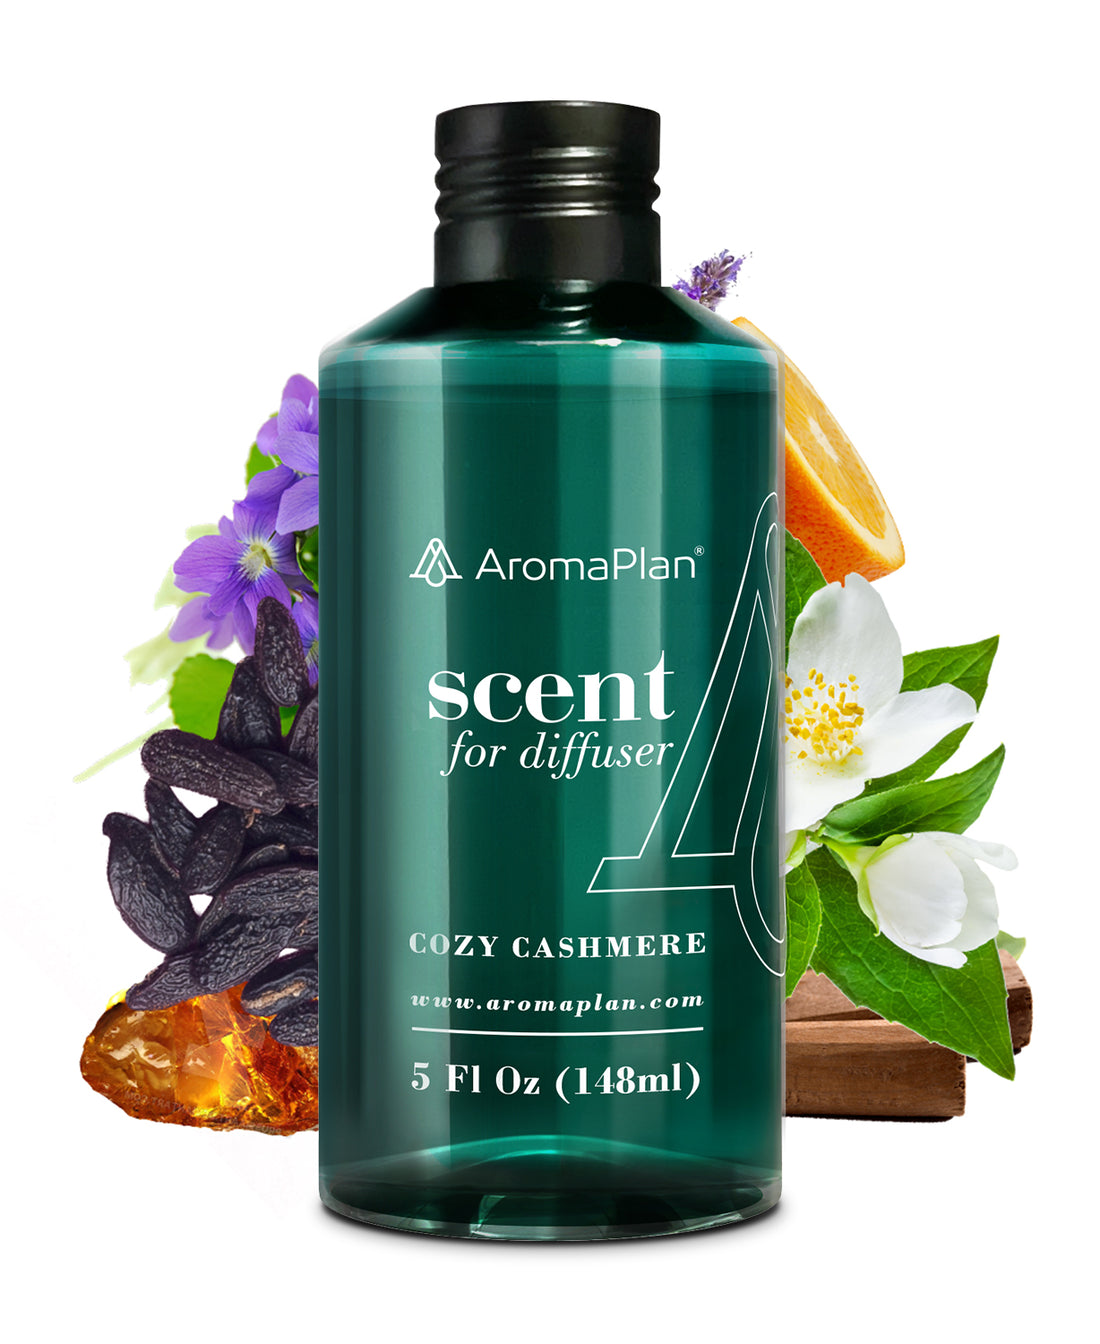 Discover the Scent Cozy Cashmere Fragrance - Aroma Oil for Scent Diffusers - Natural &amp; Vegan - Essential Oil Blends for Diffuser - Size: 5 Fl Oz. (148ml)